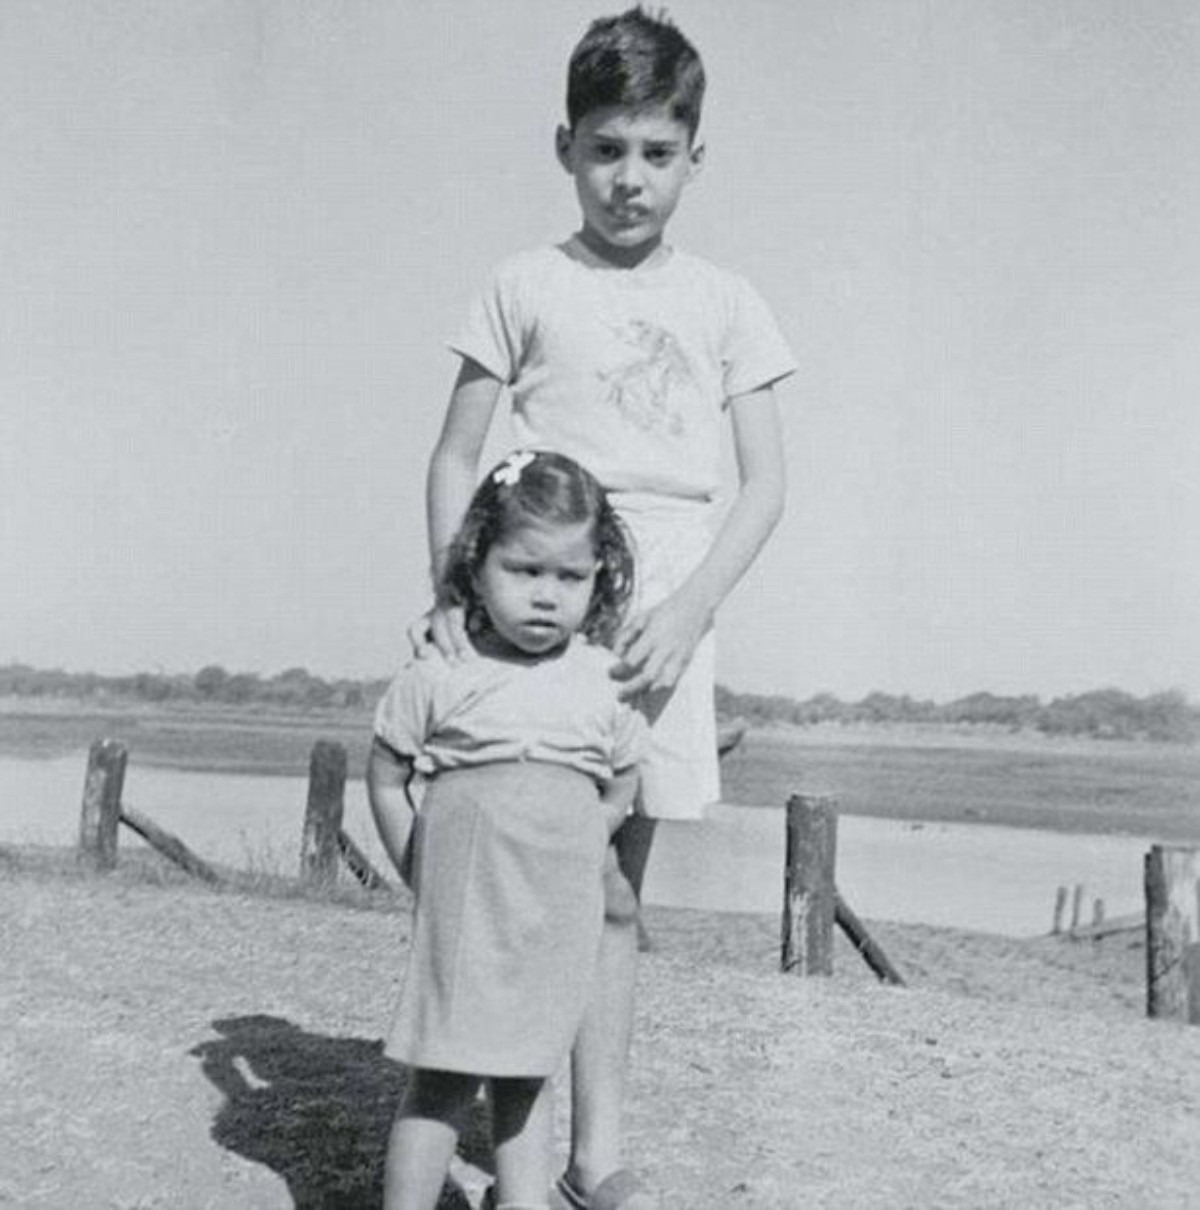 This photograph of Kashmira and her brother Farrokh (later Freddie Mercury) is believed to have been taken around 1955